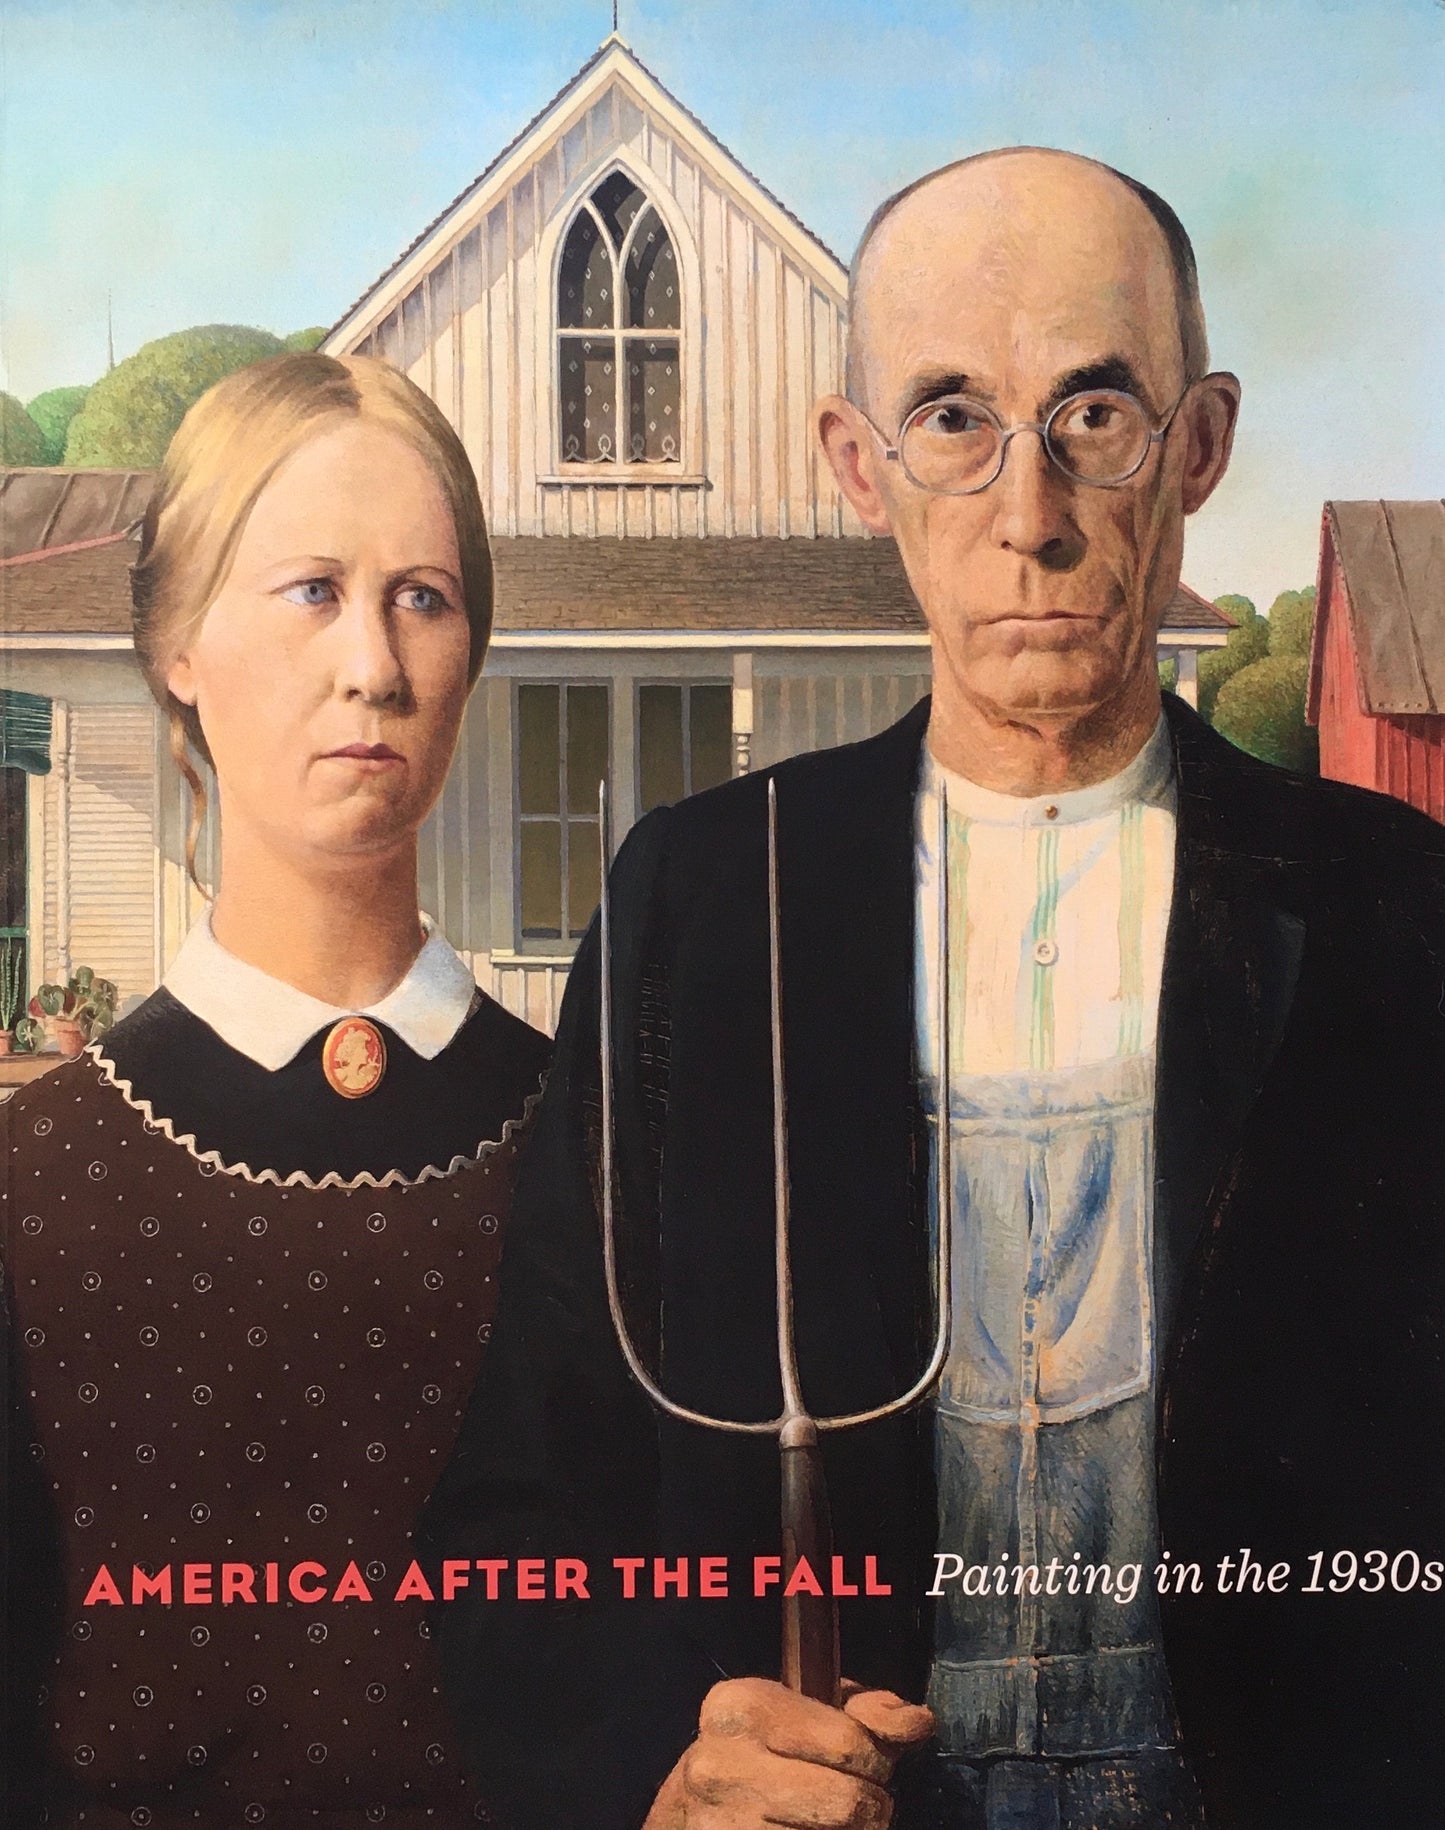 AMERICA AFTER THE FALL　Painting in the 1930s